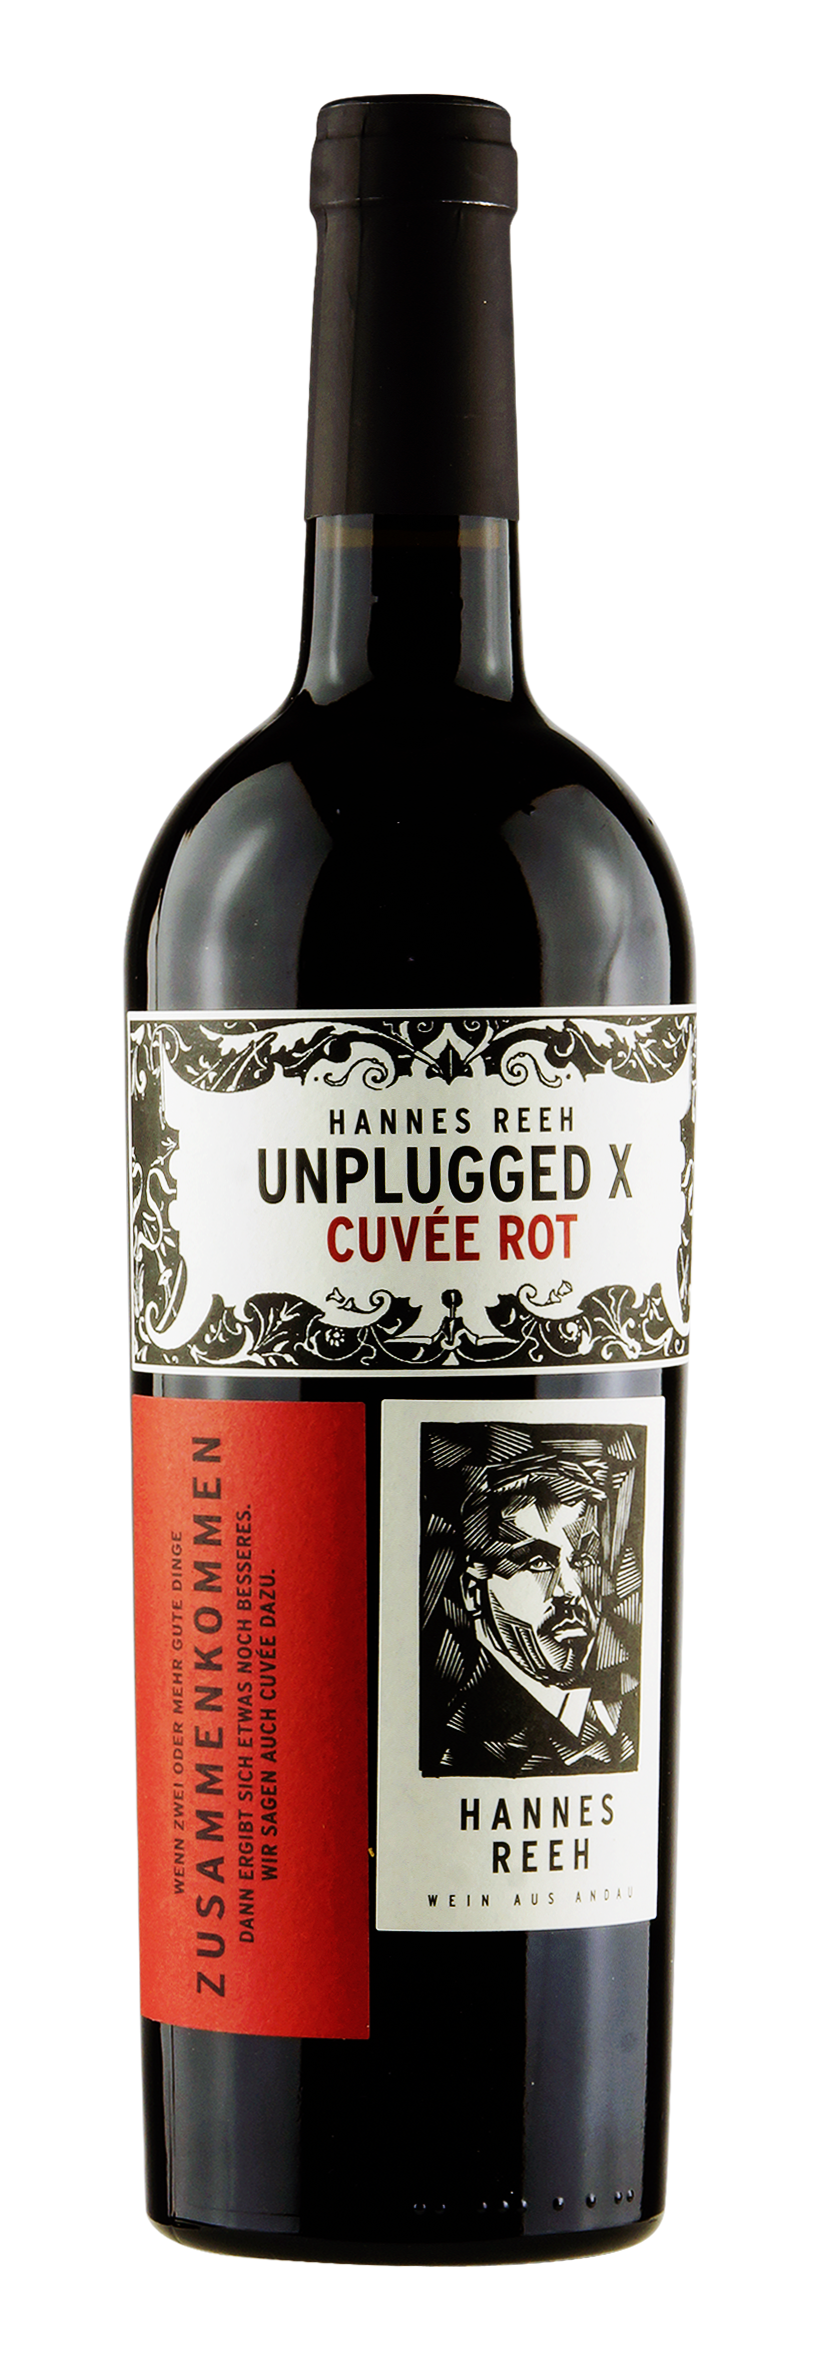 Burgenland Cuvée Rot Unplugged X 2016